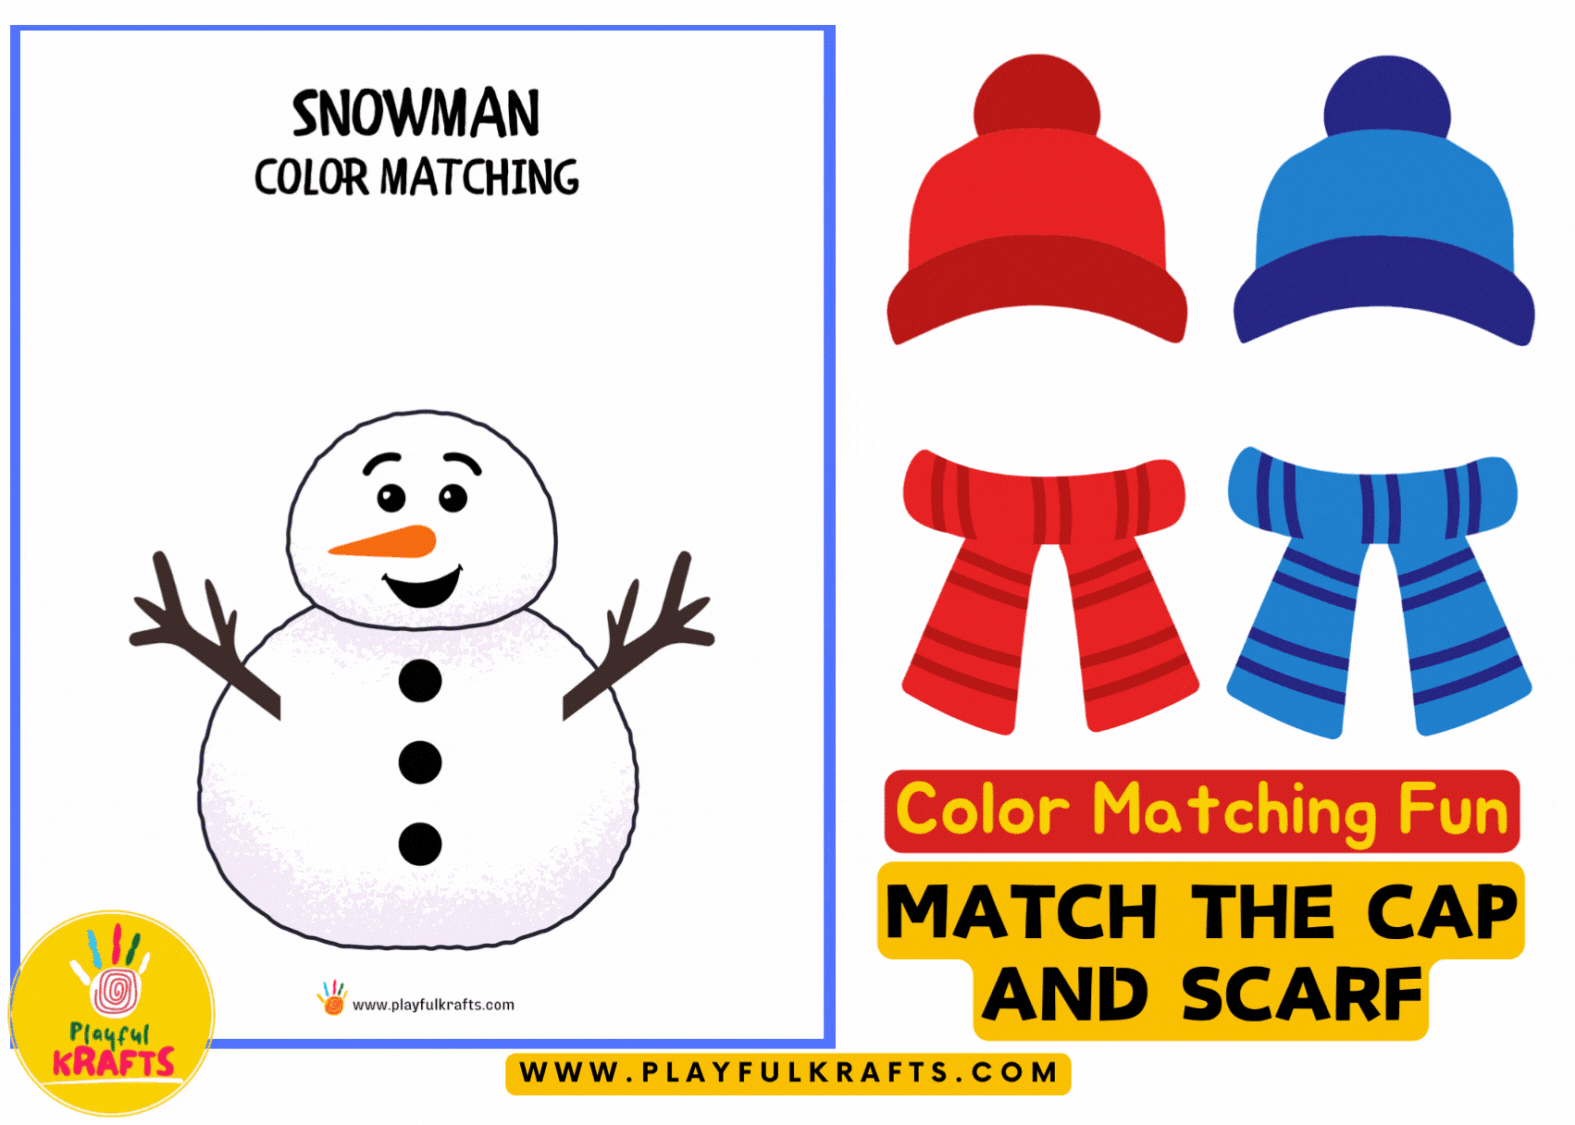 match-snowman-cap-and-scarf